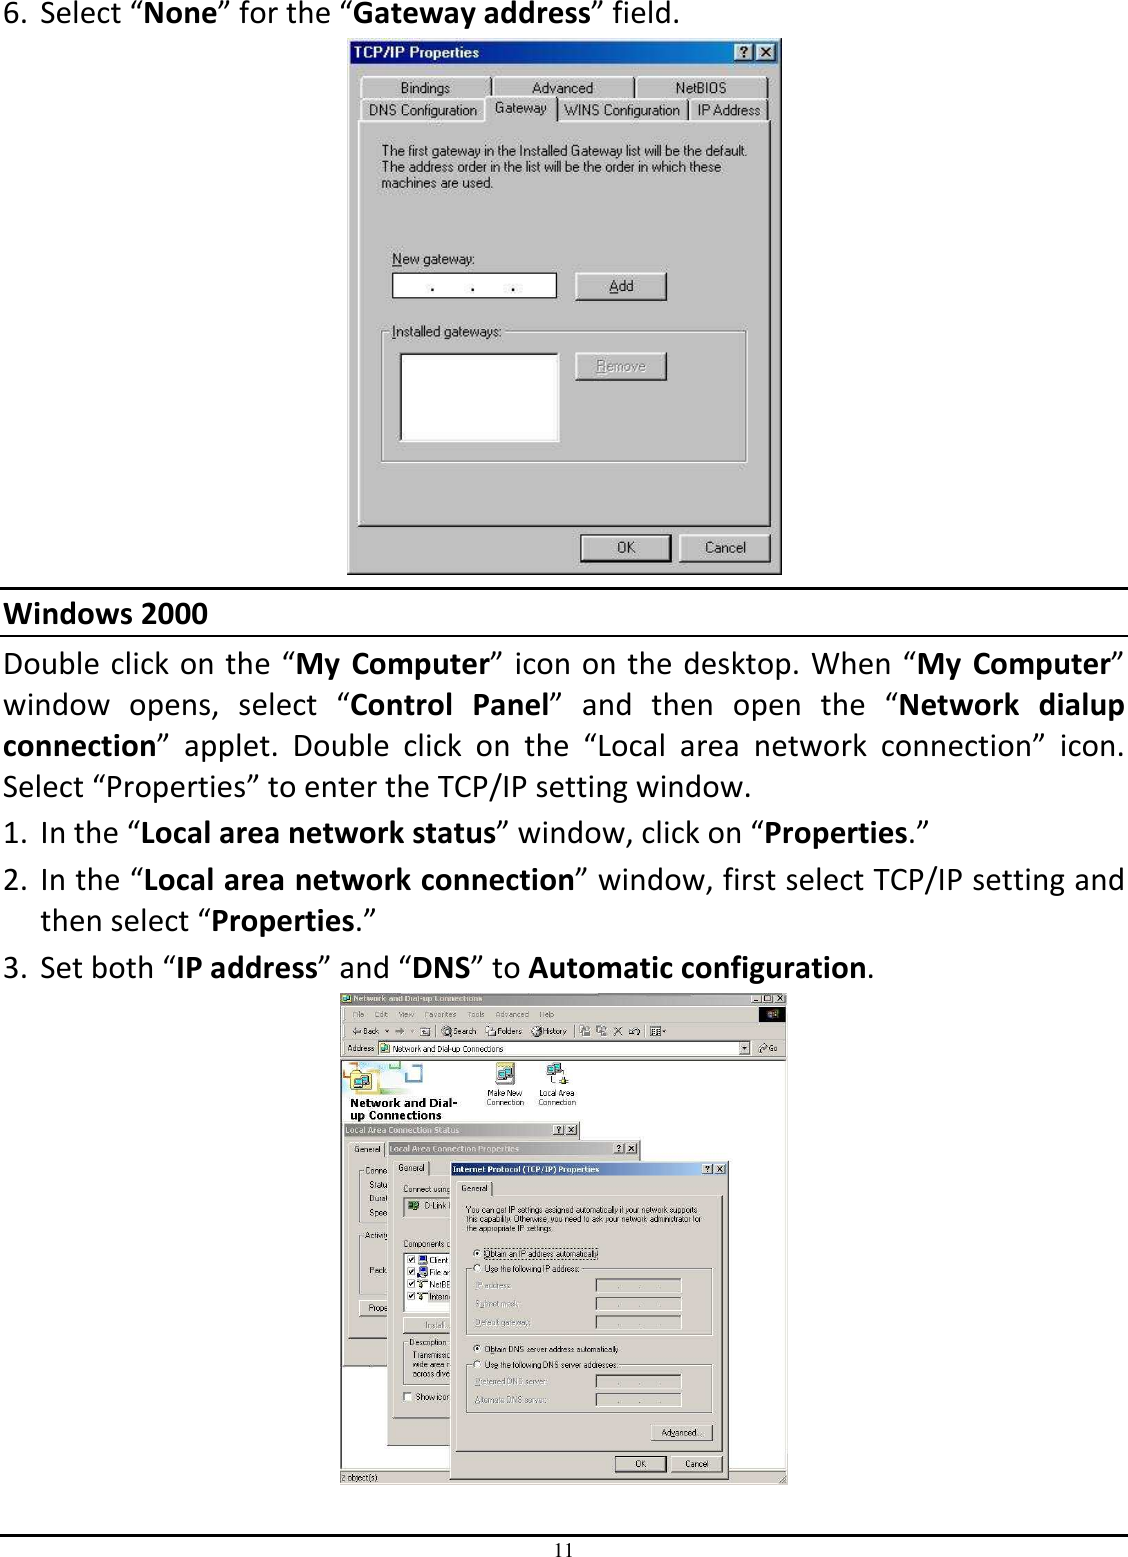 11 6. Select “None” for the “Gateway address” field.  Windows 2000 Double click on the “My  Computer” icon on the desktop. When “My  Computer” window  opens,  select  “Control  Panel”  and  then  open  the  “Network  dialup connection”  applet.  Double  click  on  the  “Local  area  network  connection”  icon. Select “Properties” to enter the TCP/IP setting window. 1. In the “Local area network status” window, click on “Properties.” 2. In the “Local area network connection” window, first select TCP/IP setting and then select “Properties.” 3. Set both “IP address” and “DNS” to Automatic configuration.  